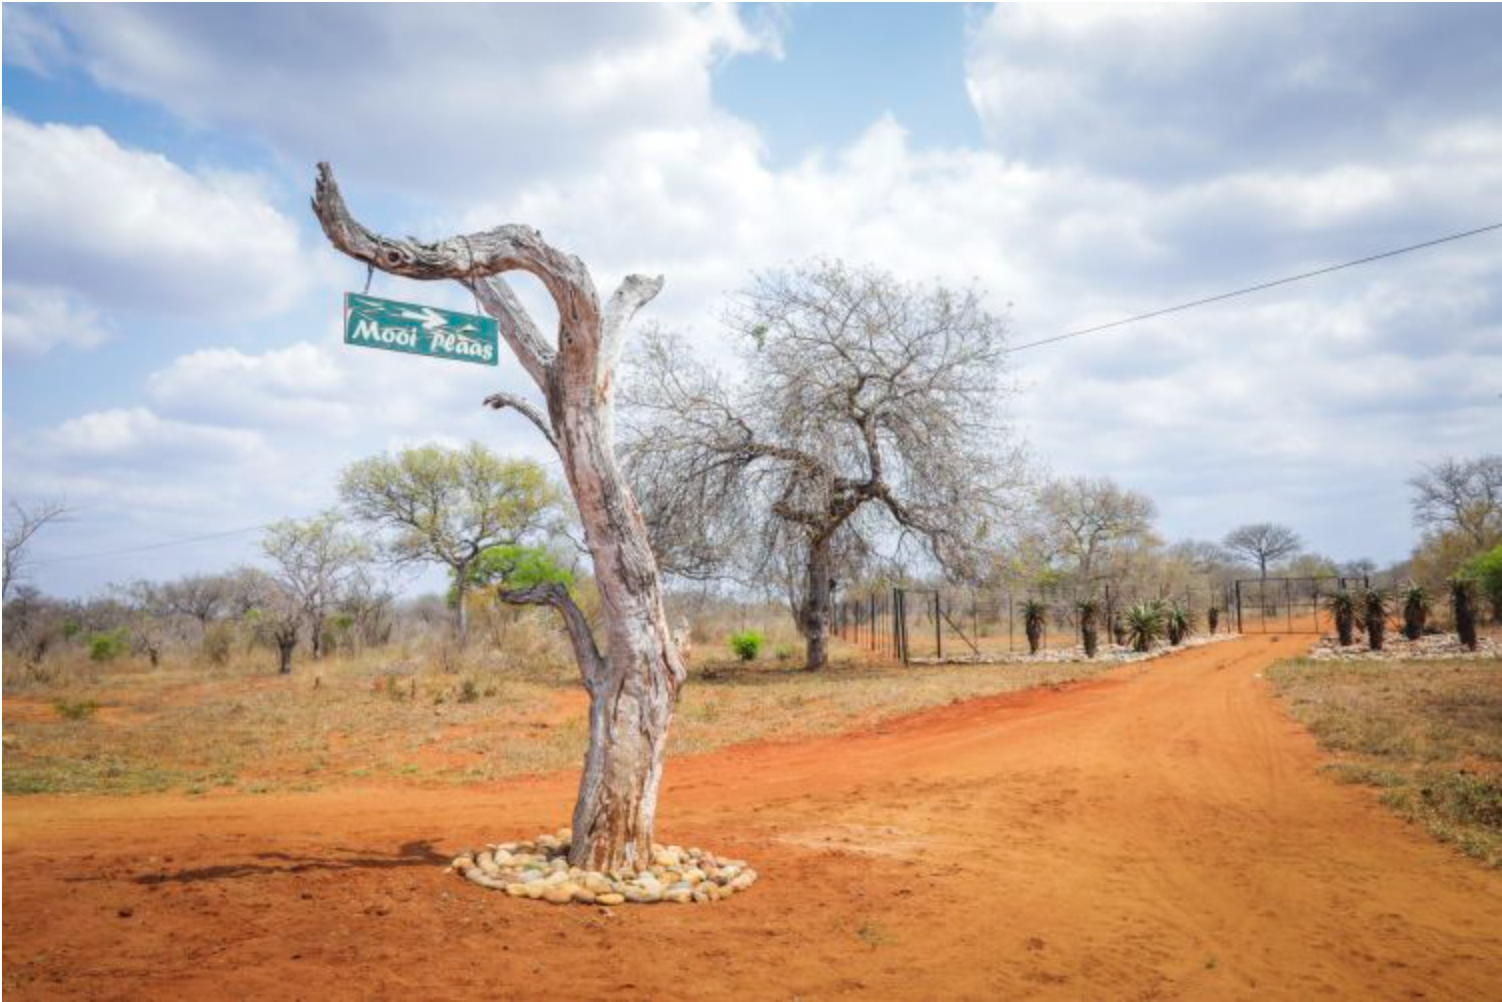 Twin City took over the leasehold of the 8,000ha Mooiplaas reserve from private investors, and consolidated it into Karangani Game Reserve. Image by Filipa Domingues. Mozambique, 2018.